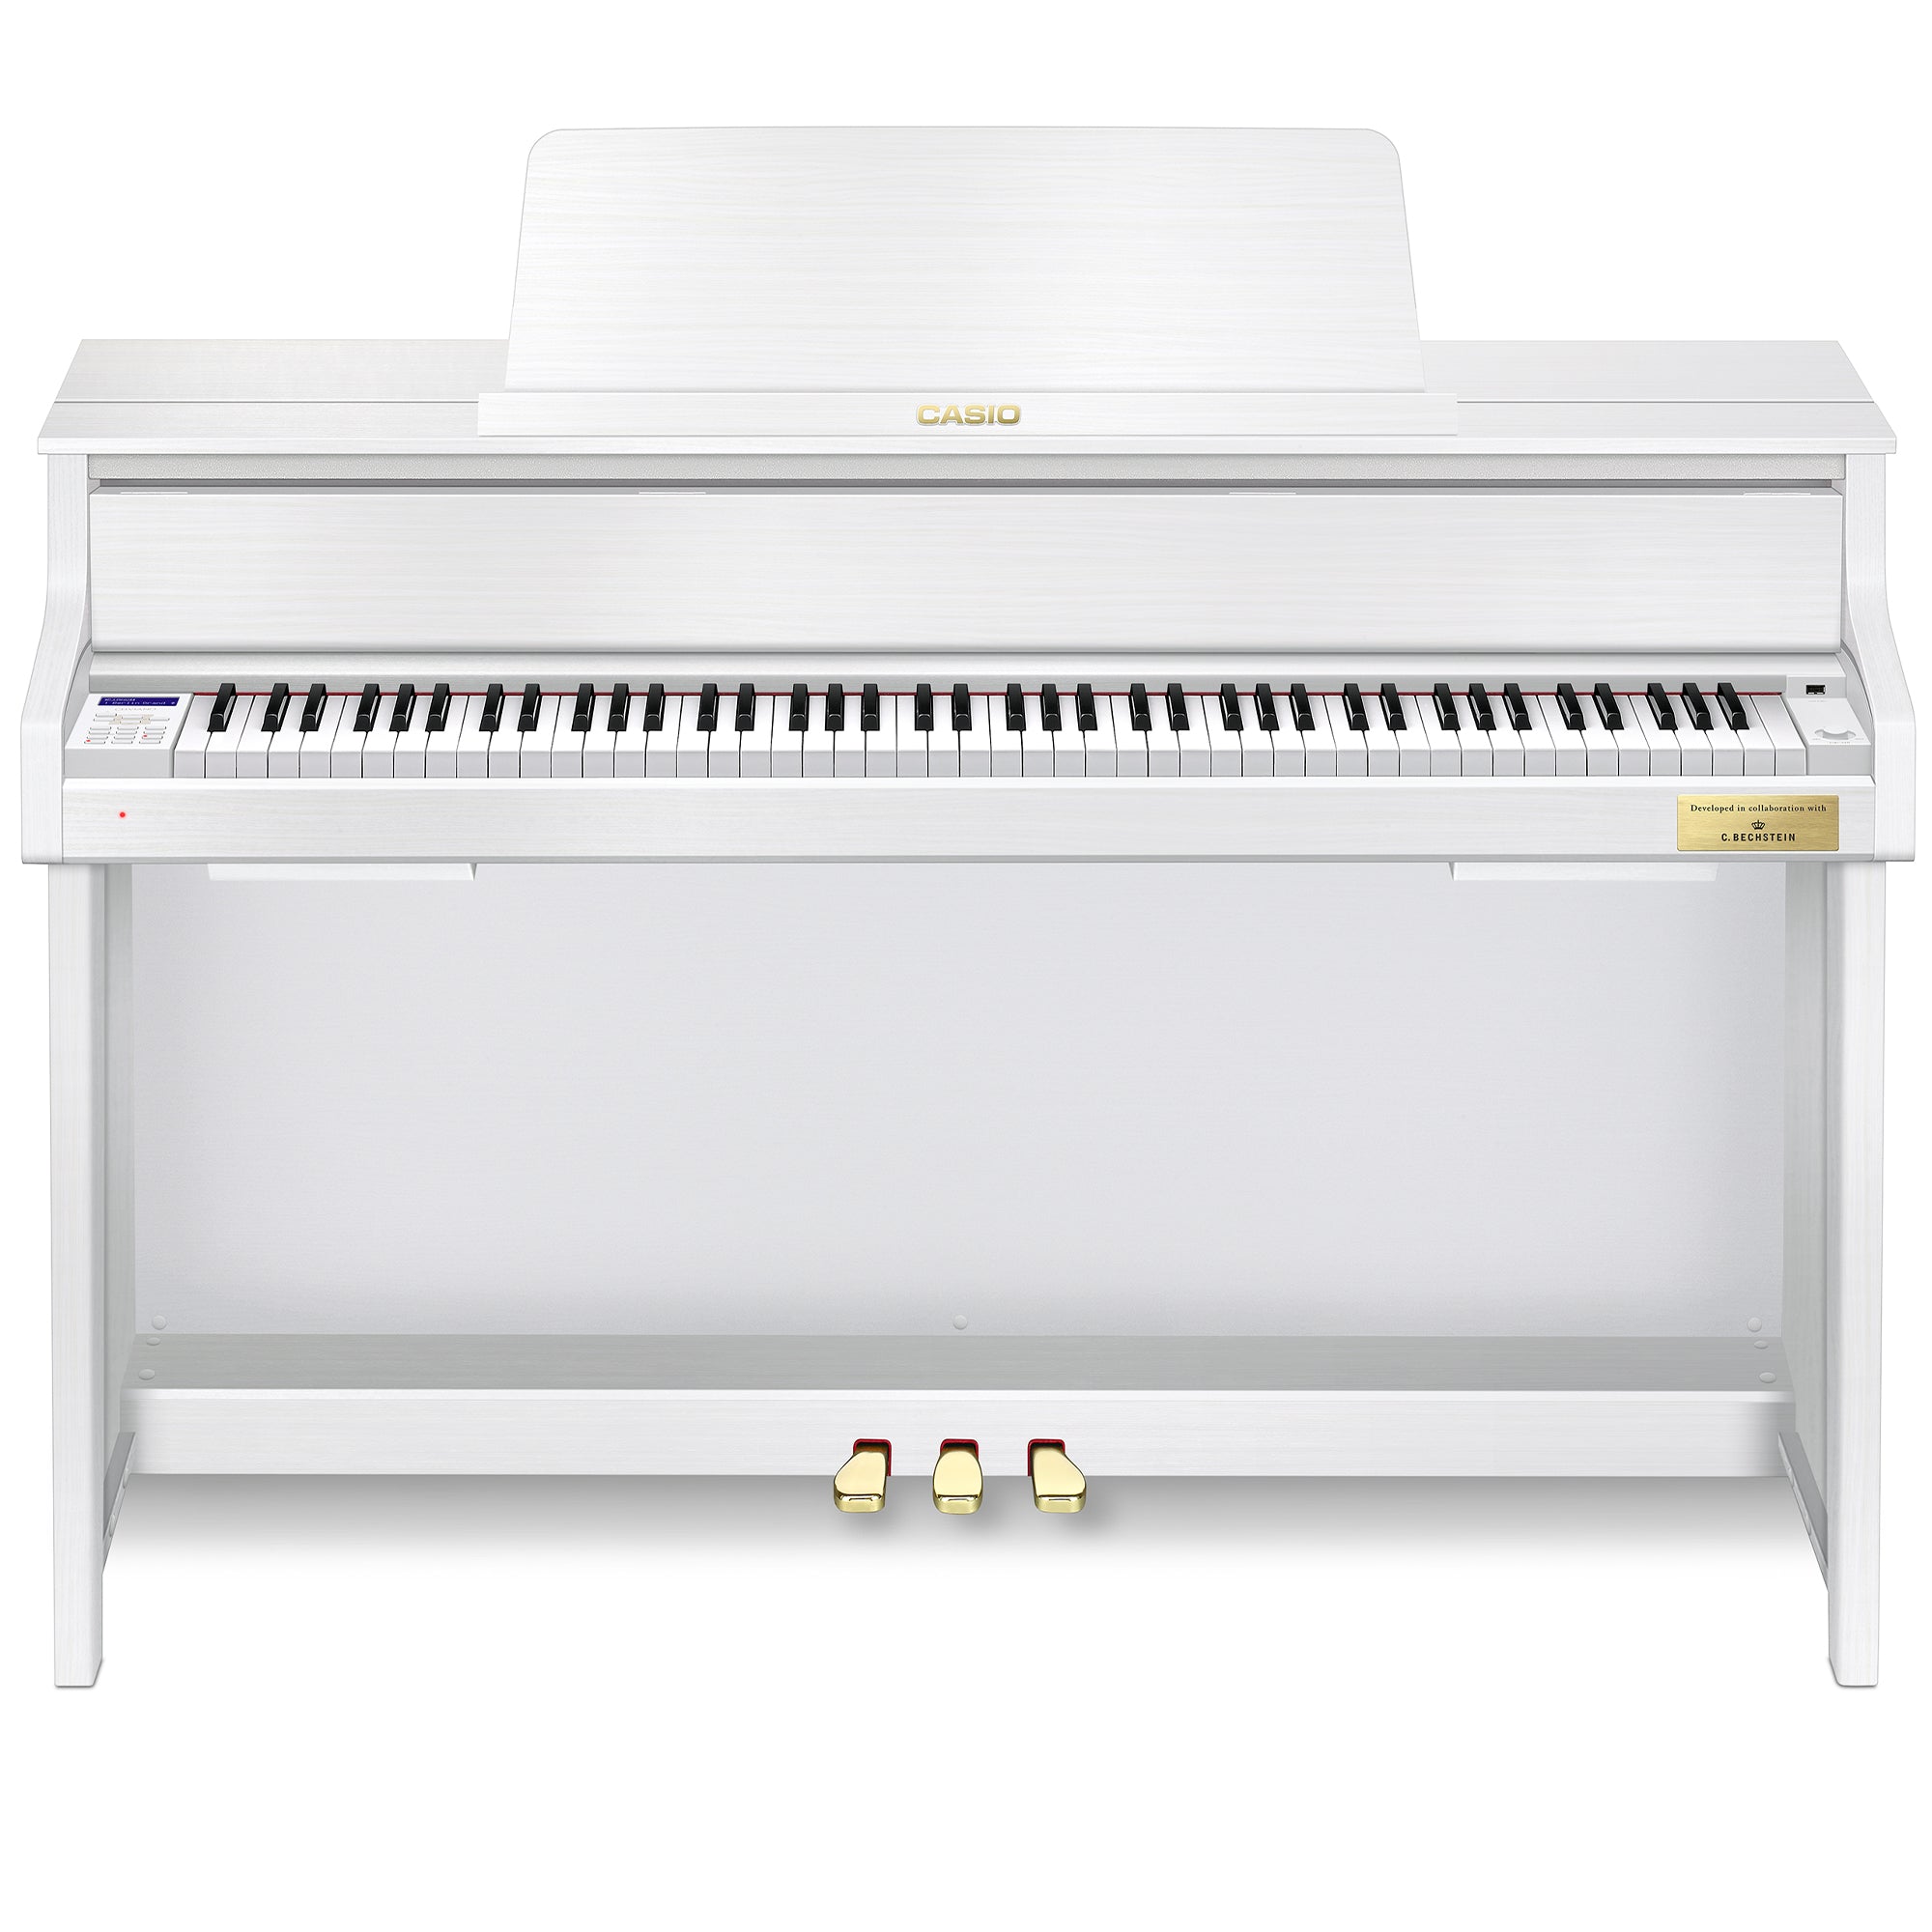 Casio Celviano Grand Hybrid GP-310 Digital Piano - Natural White Wood - Front View